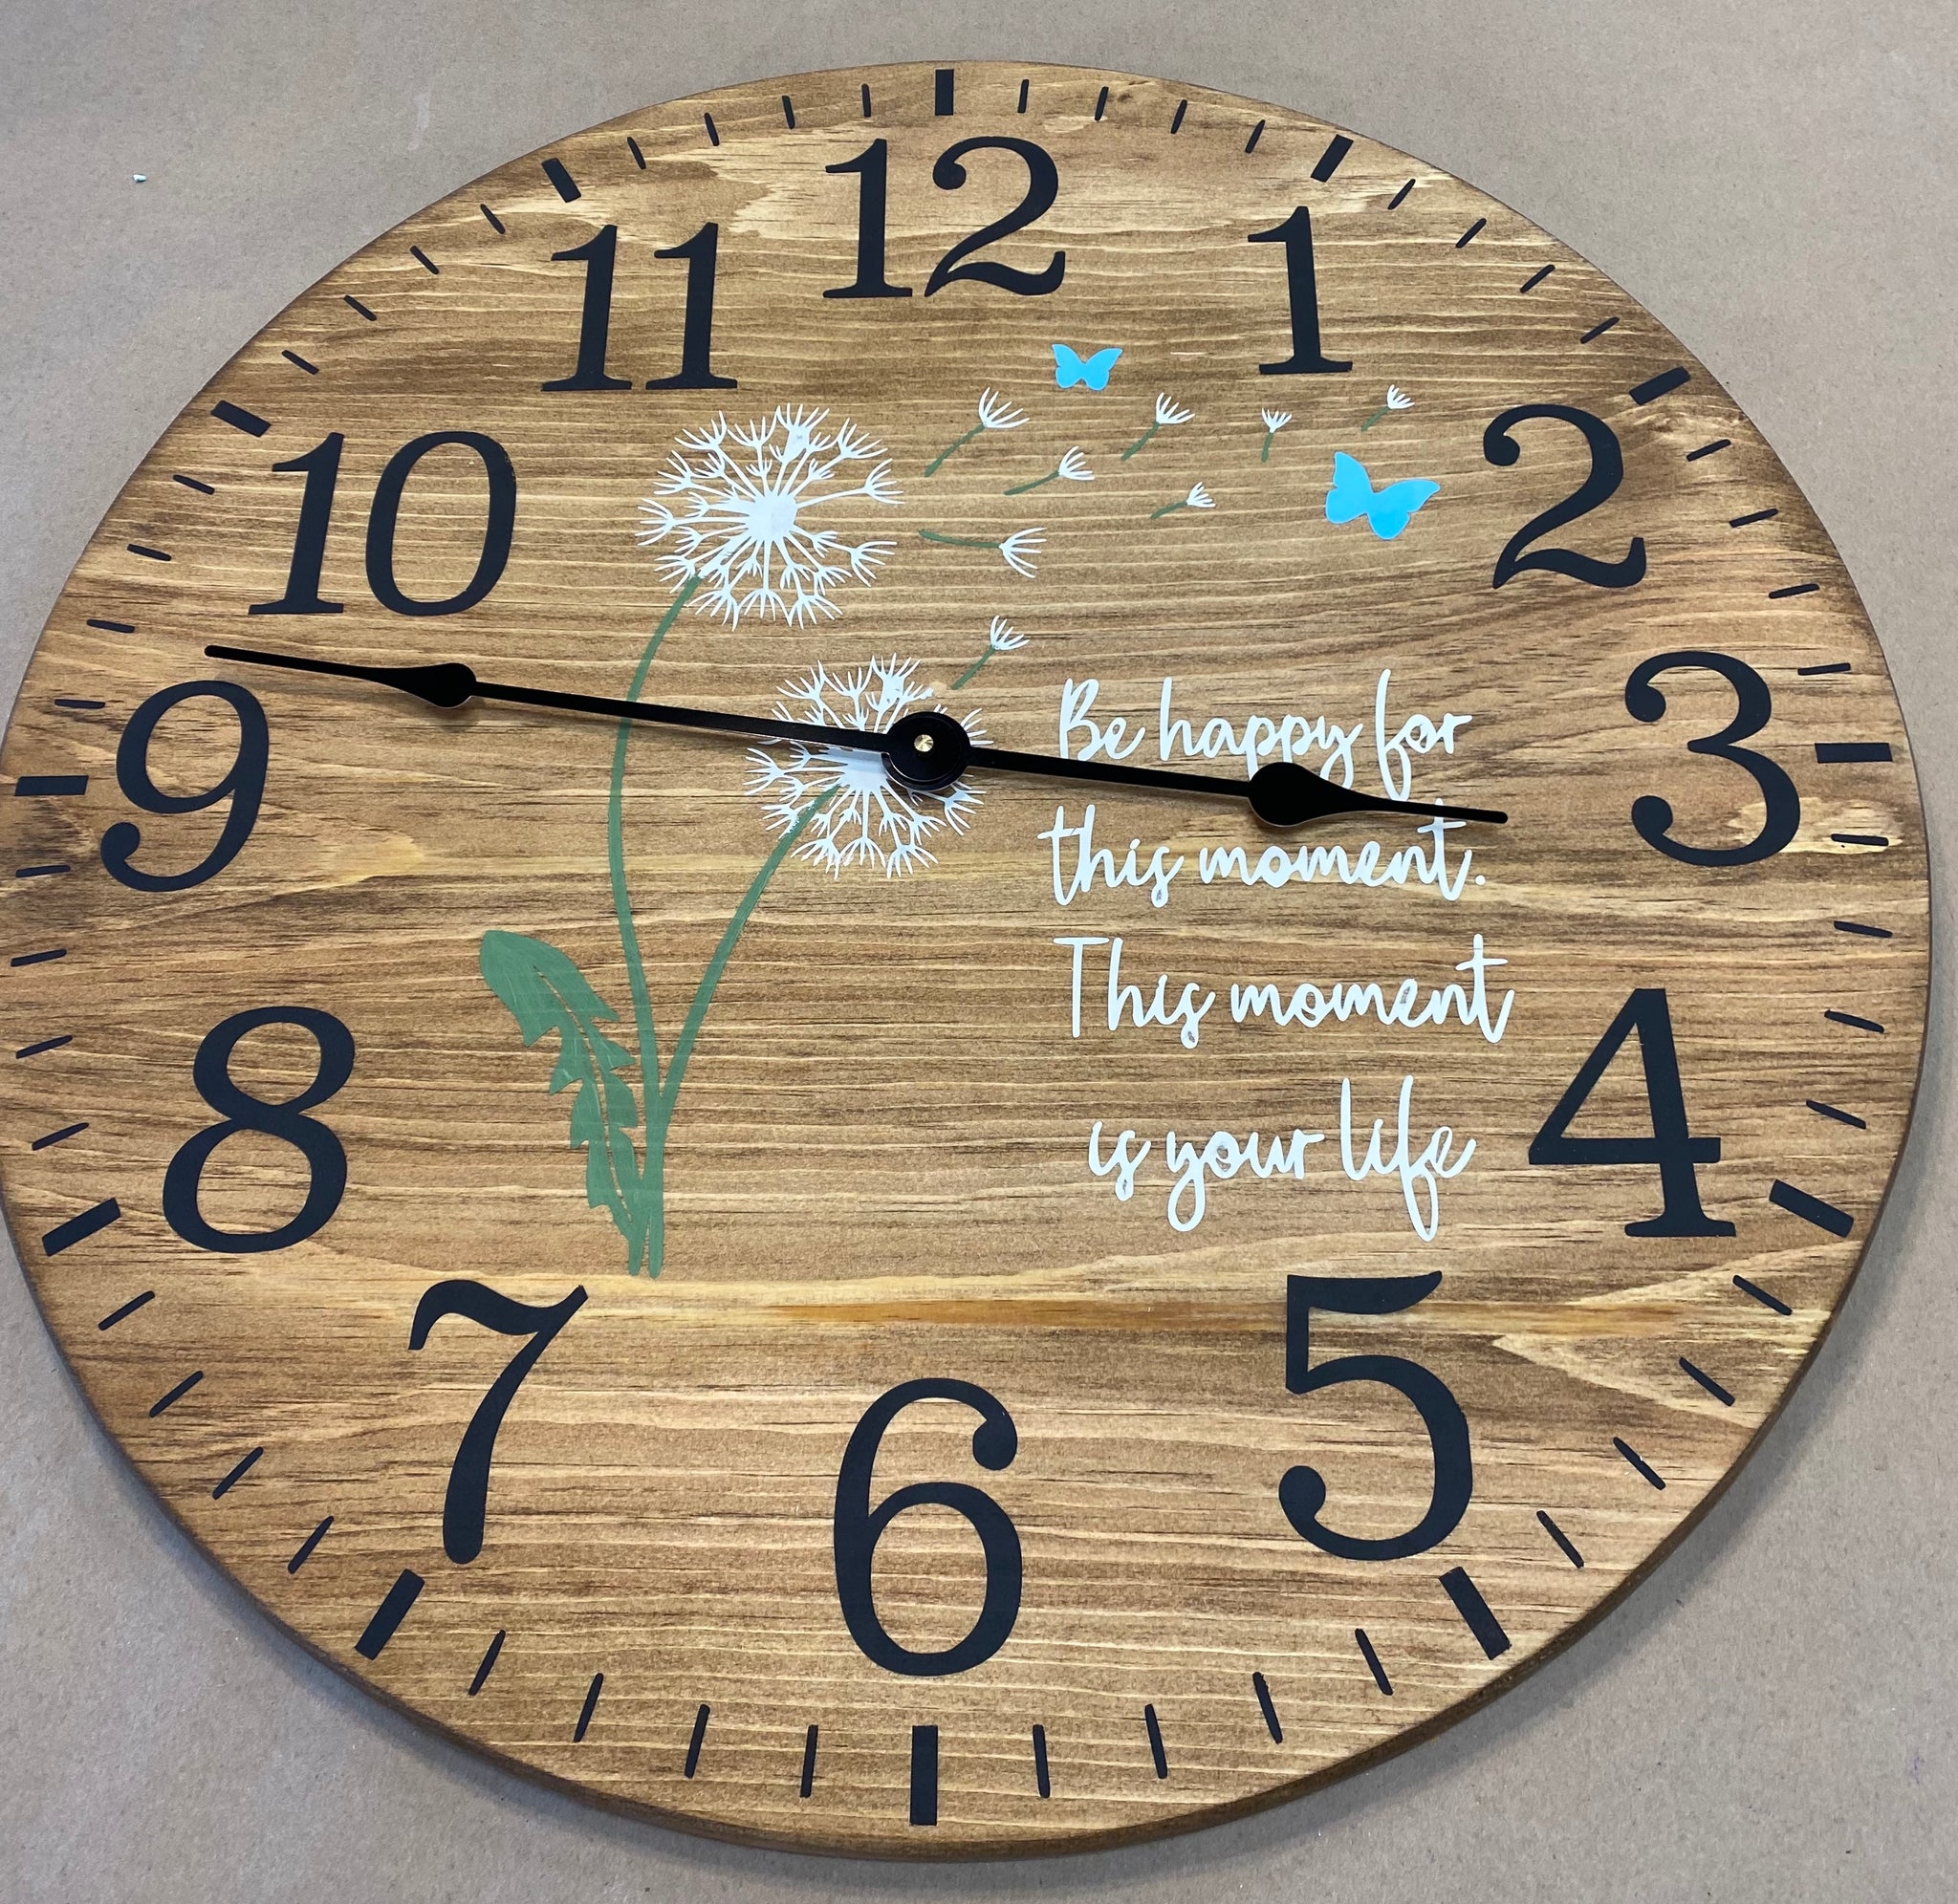 24" Clock Be happy for the moment